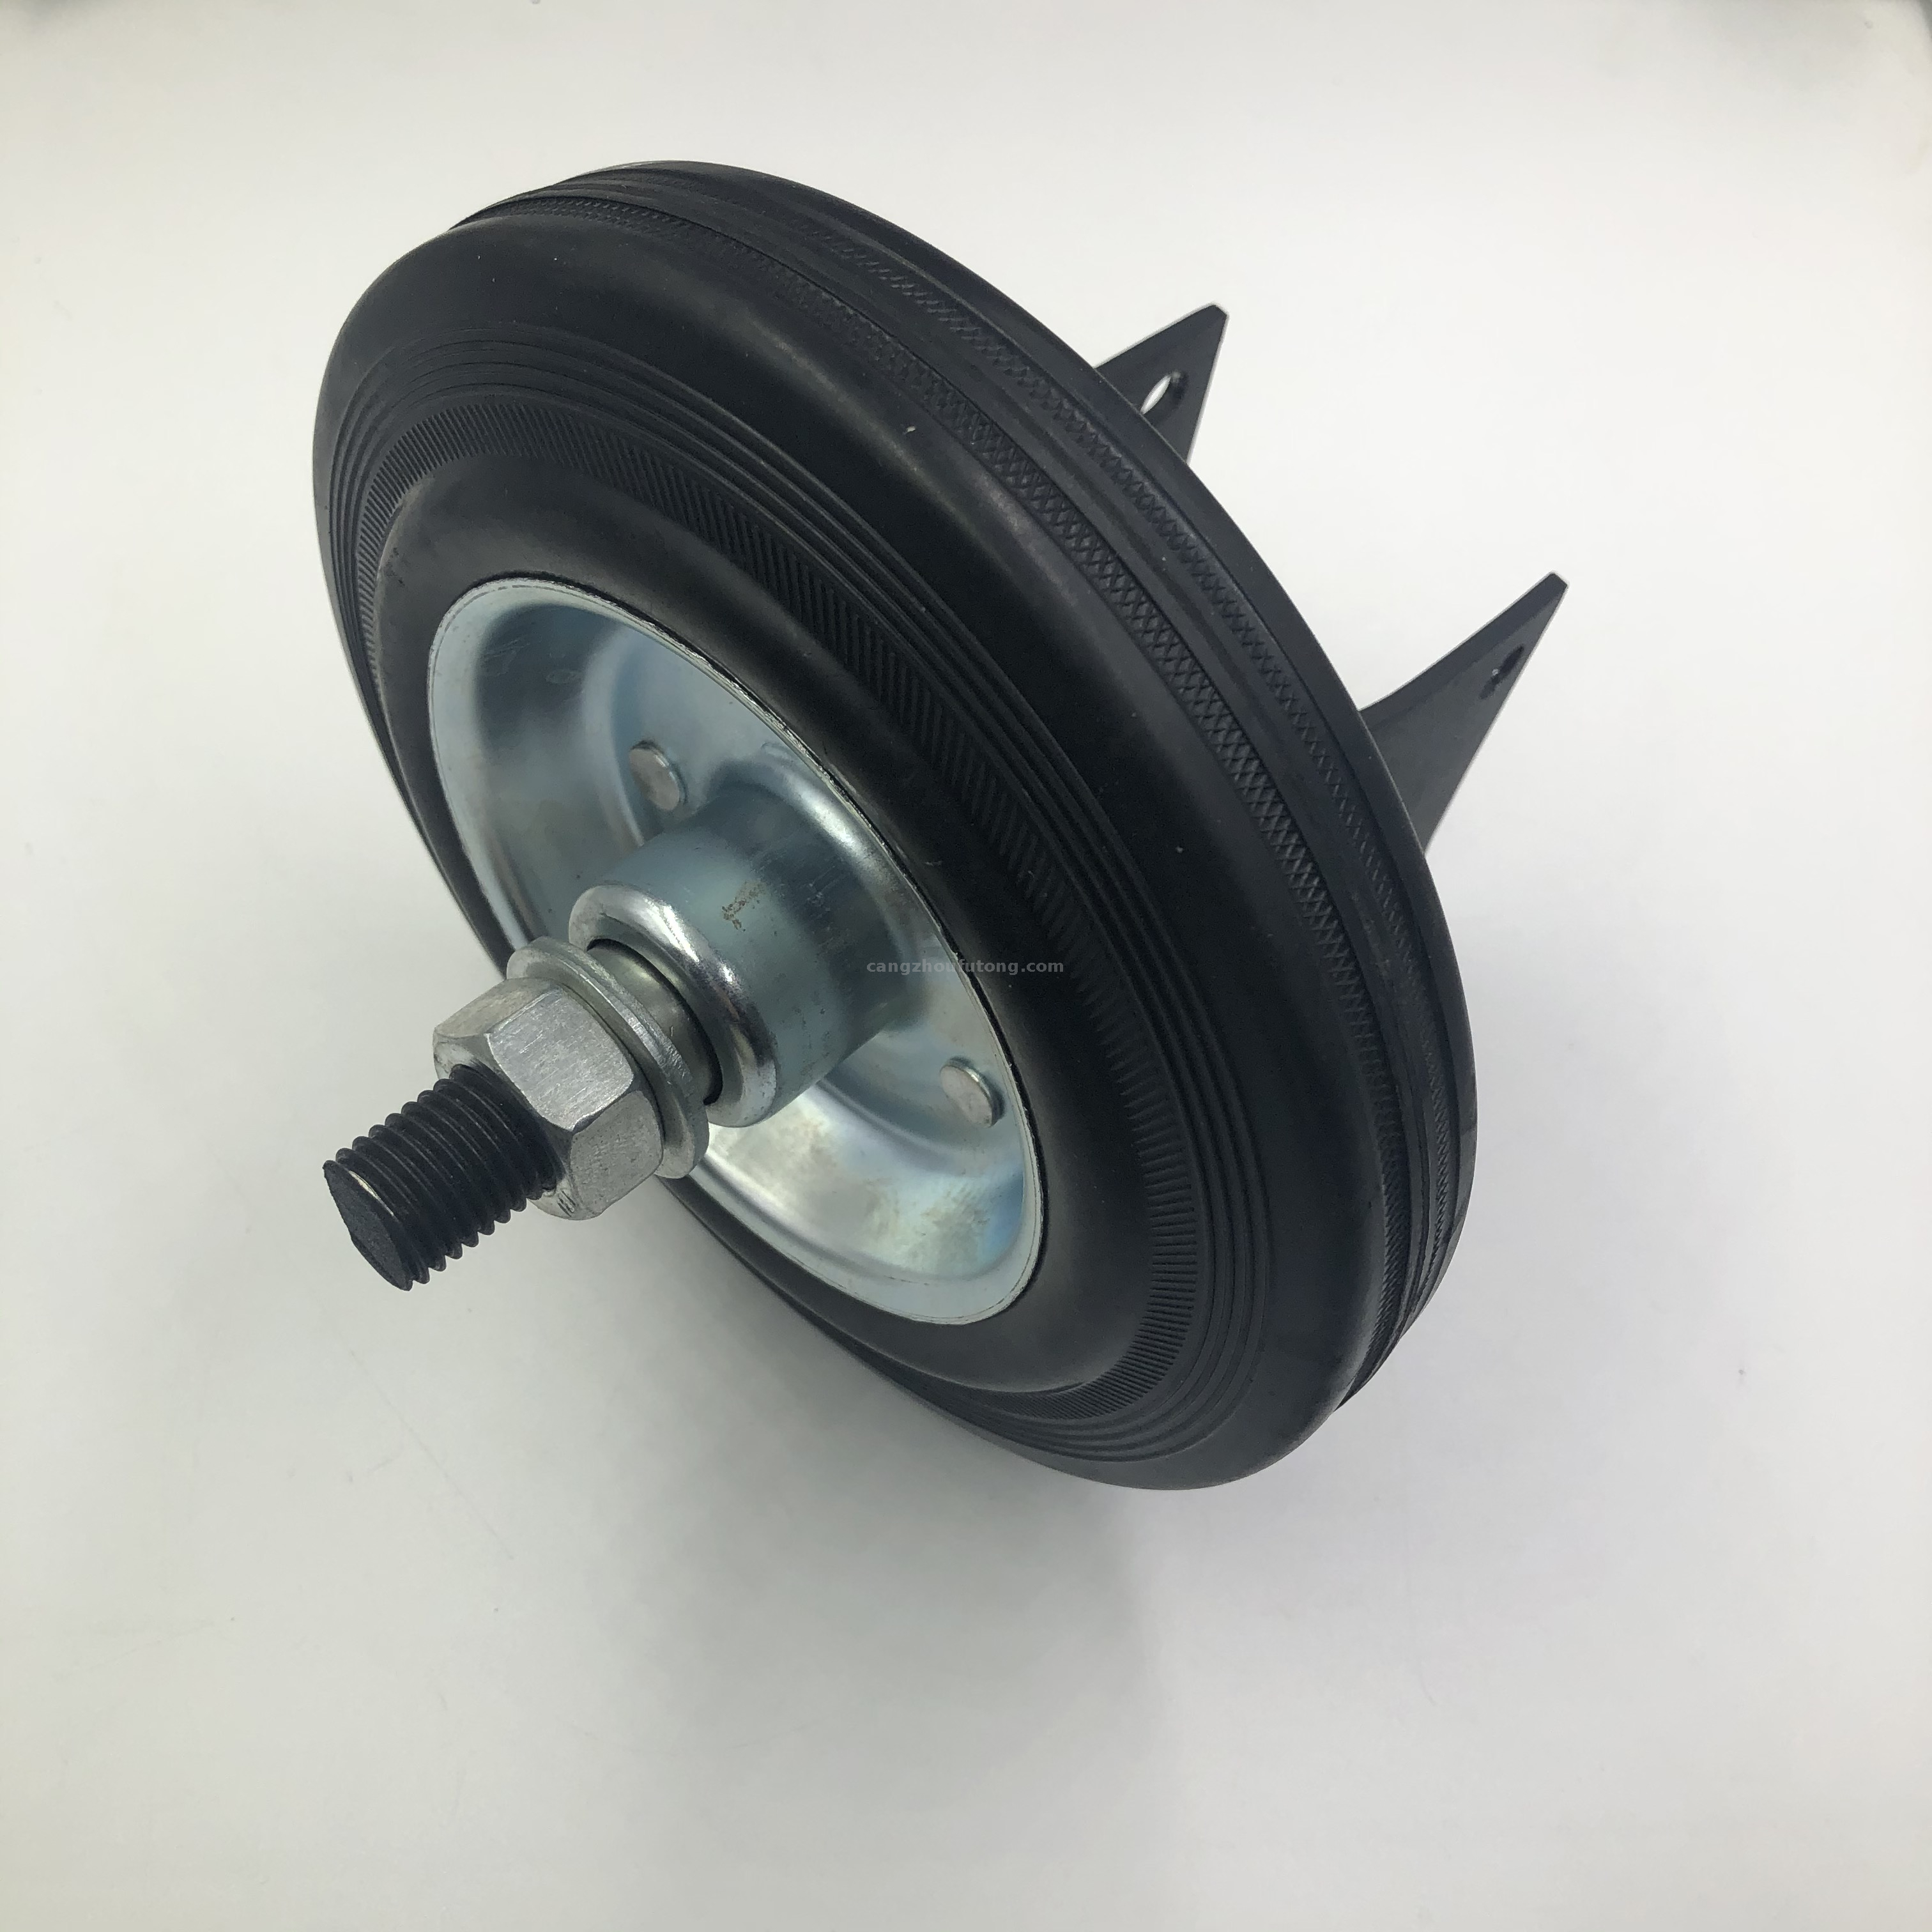 Factory Drop Shipping 4 inch Spring Loaded Gate Caster Rubber Wheel